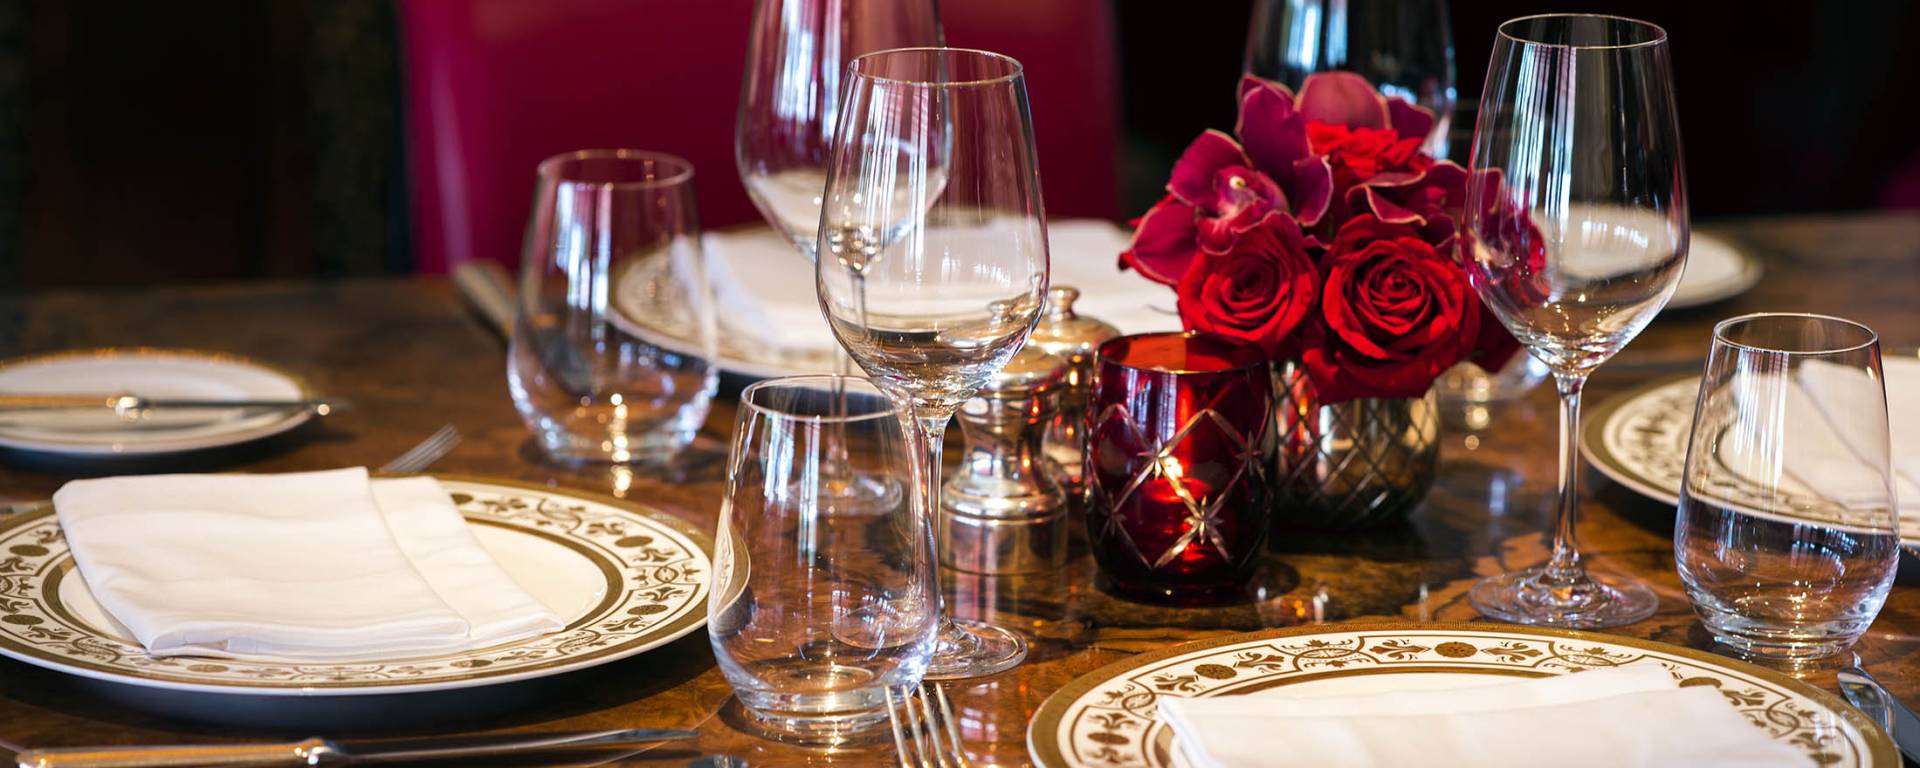 table setting with rose centerpieces